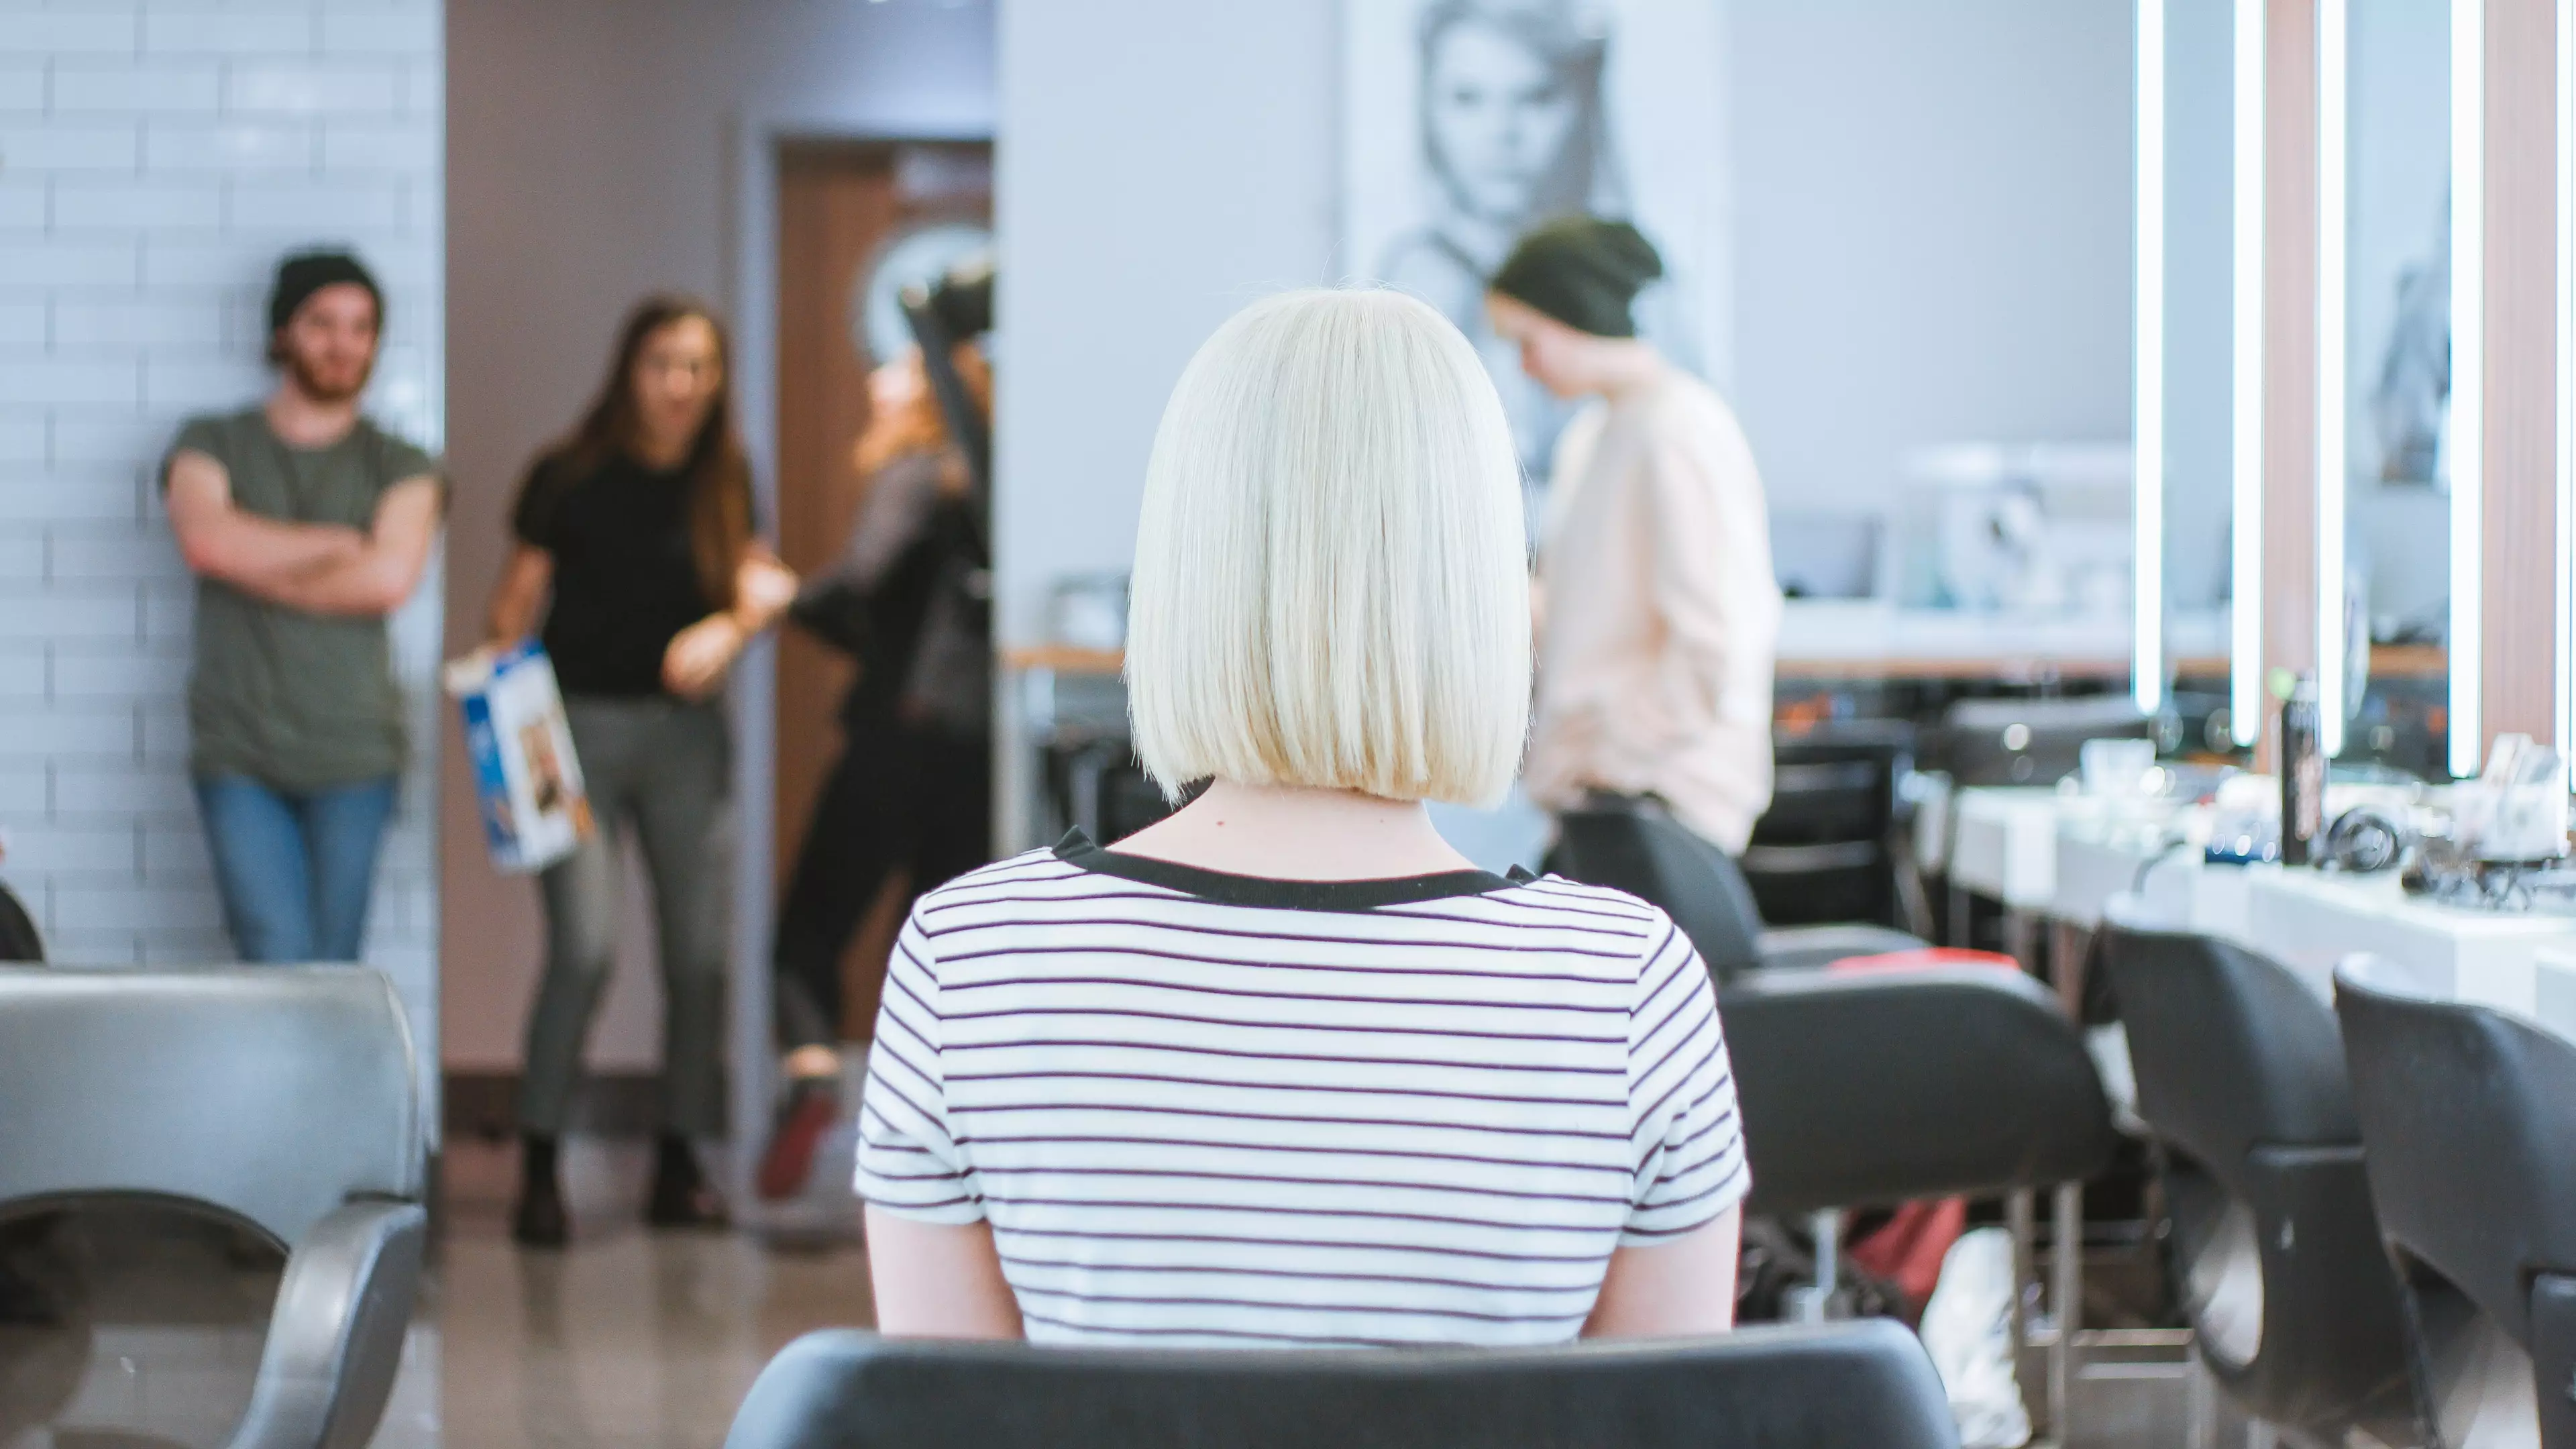 Top Hairdresser Wants More Women To Go For A Bob As It's More 'Hygienic'